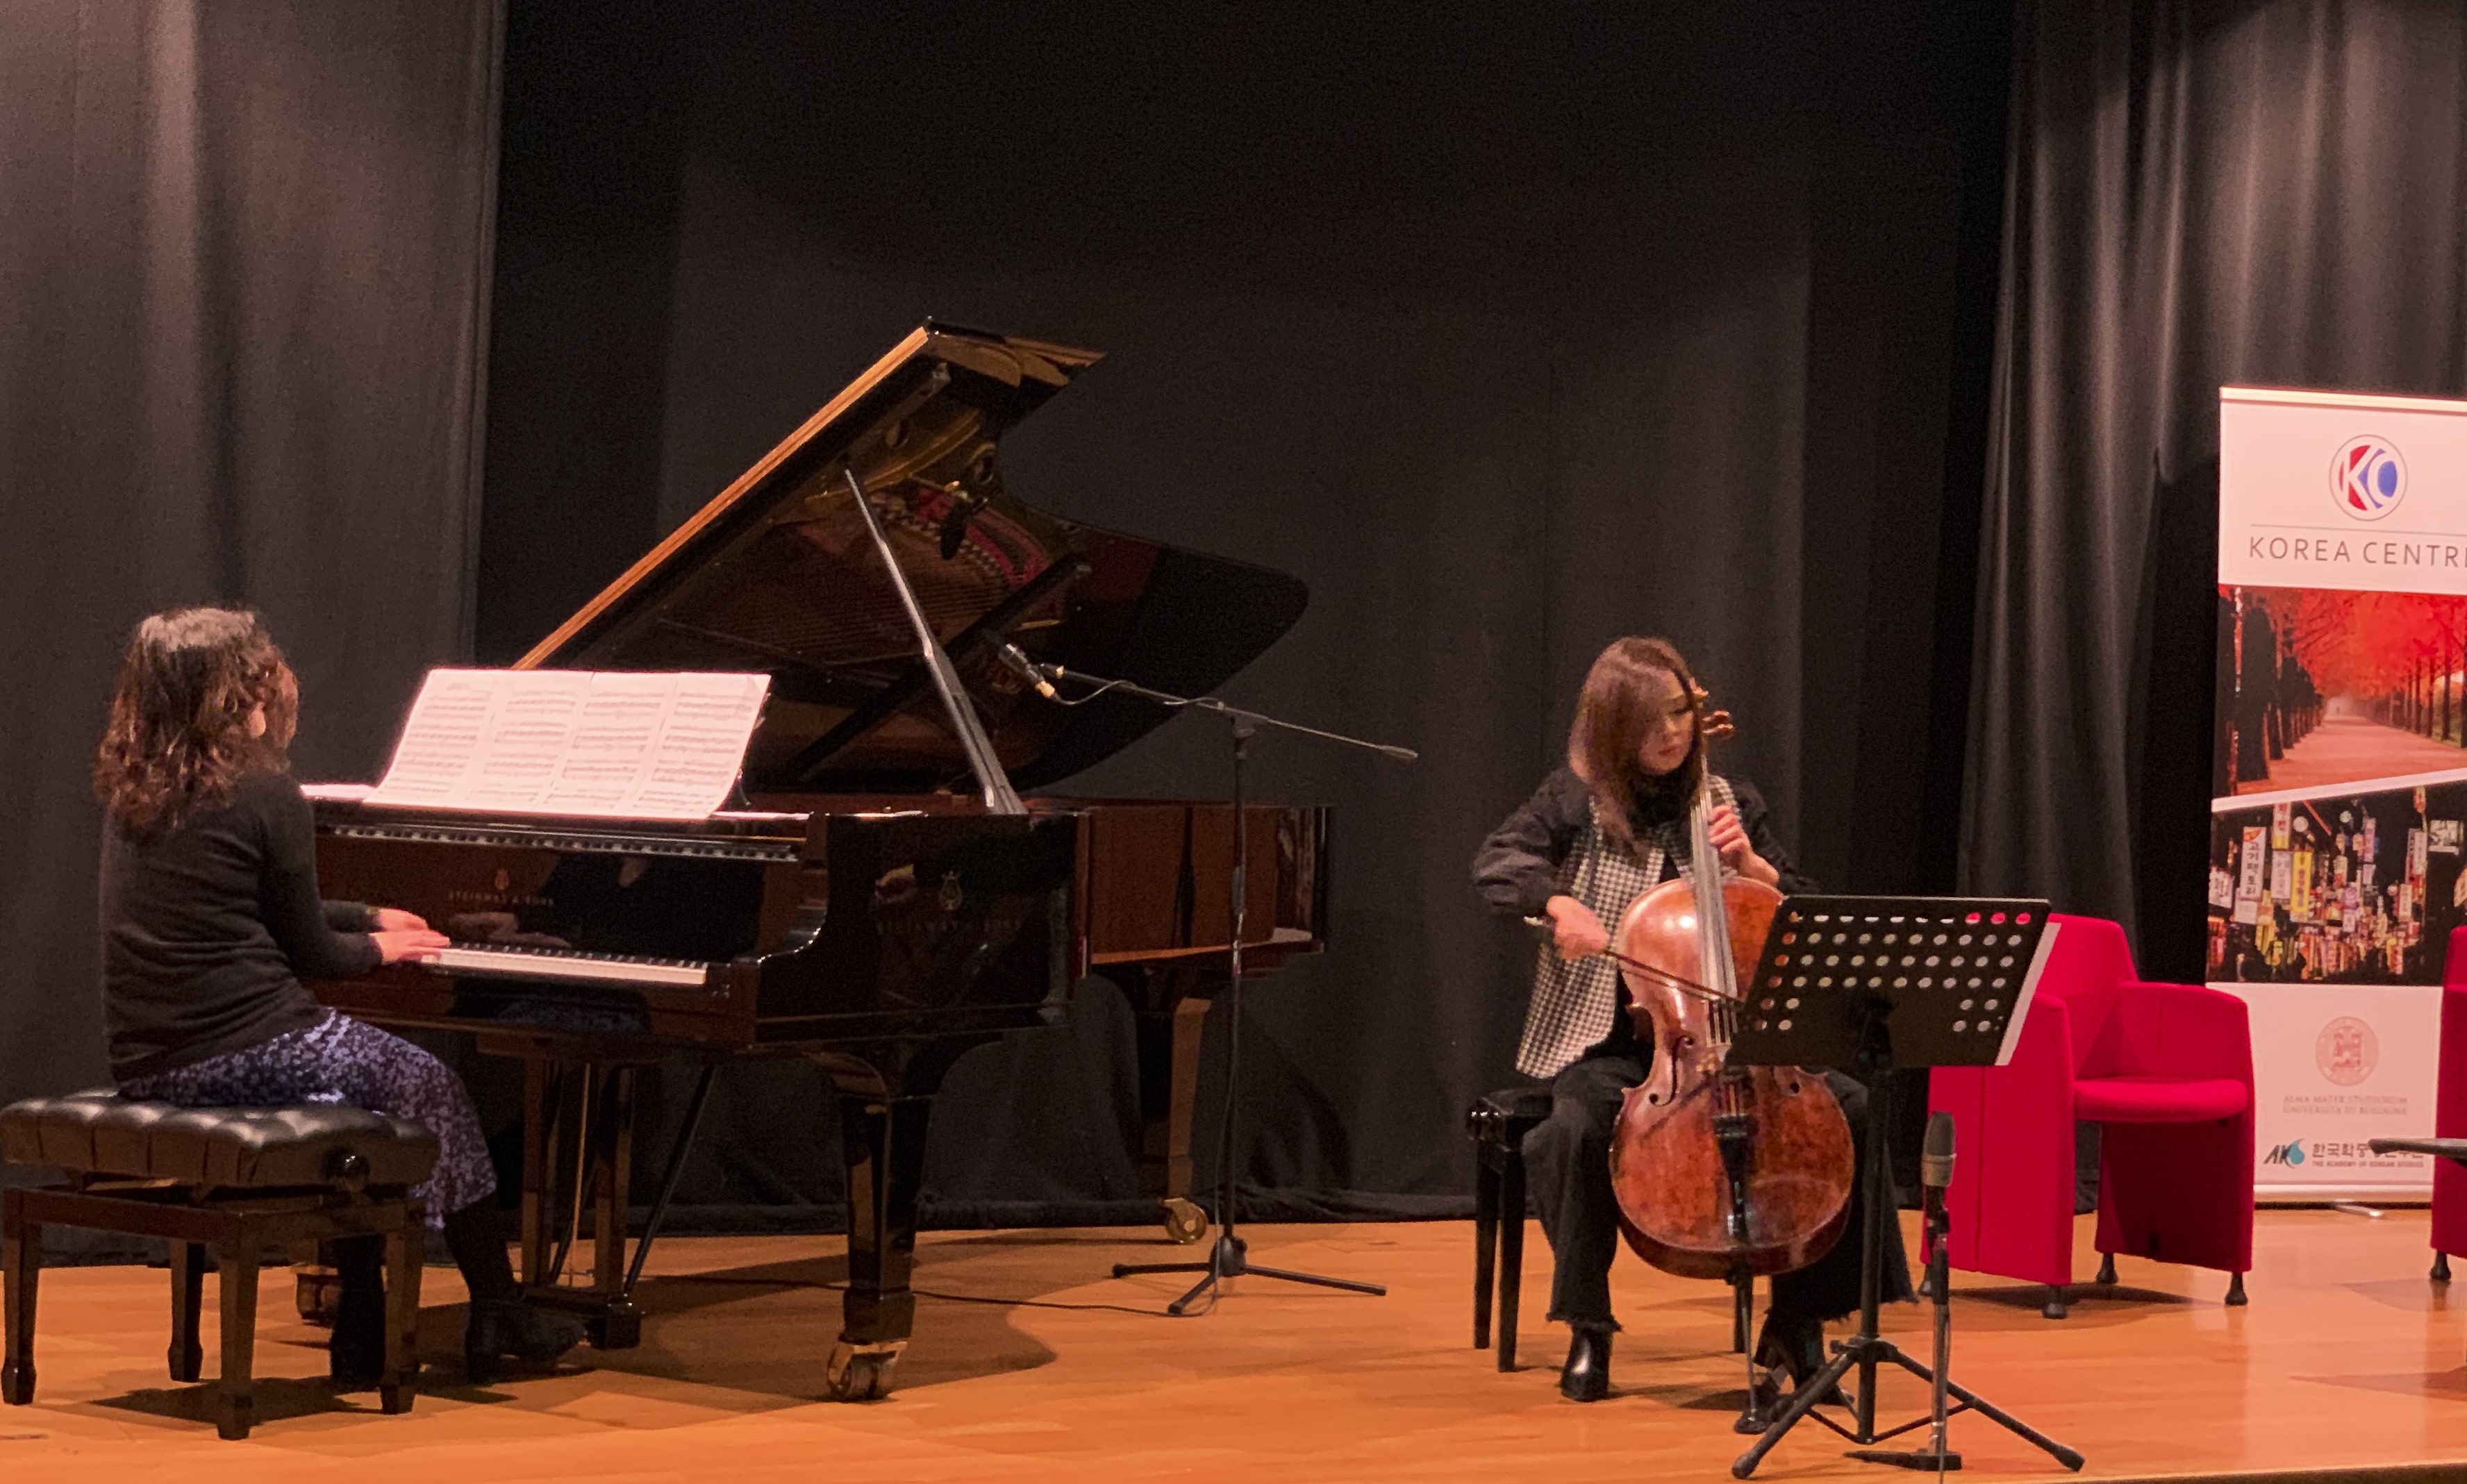 “From Korea To Italy”: meeting with South Korean cellist Kyung-mi Lee